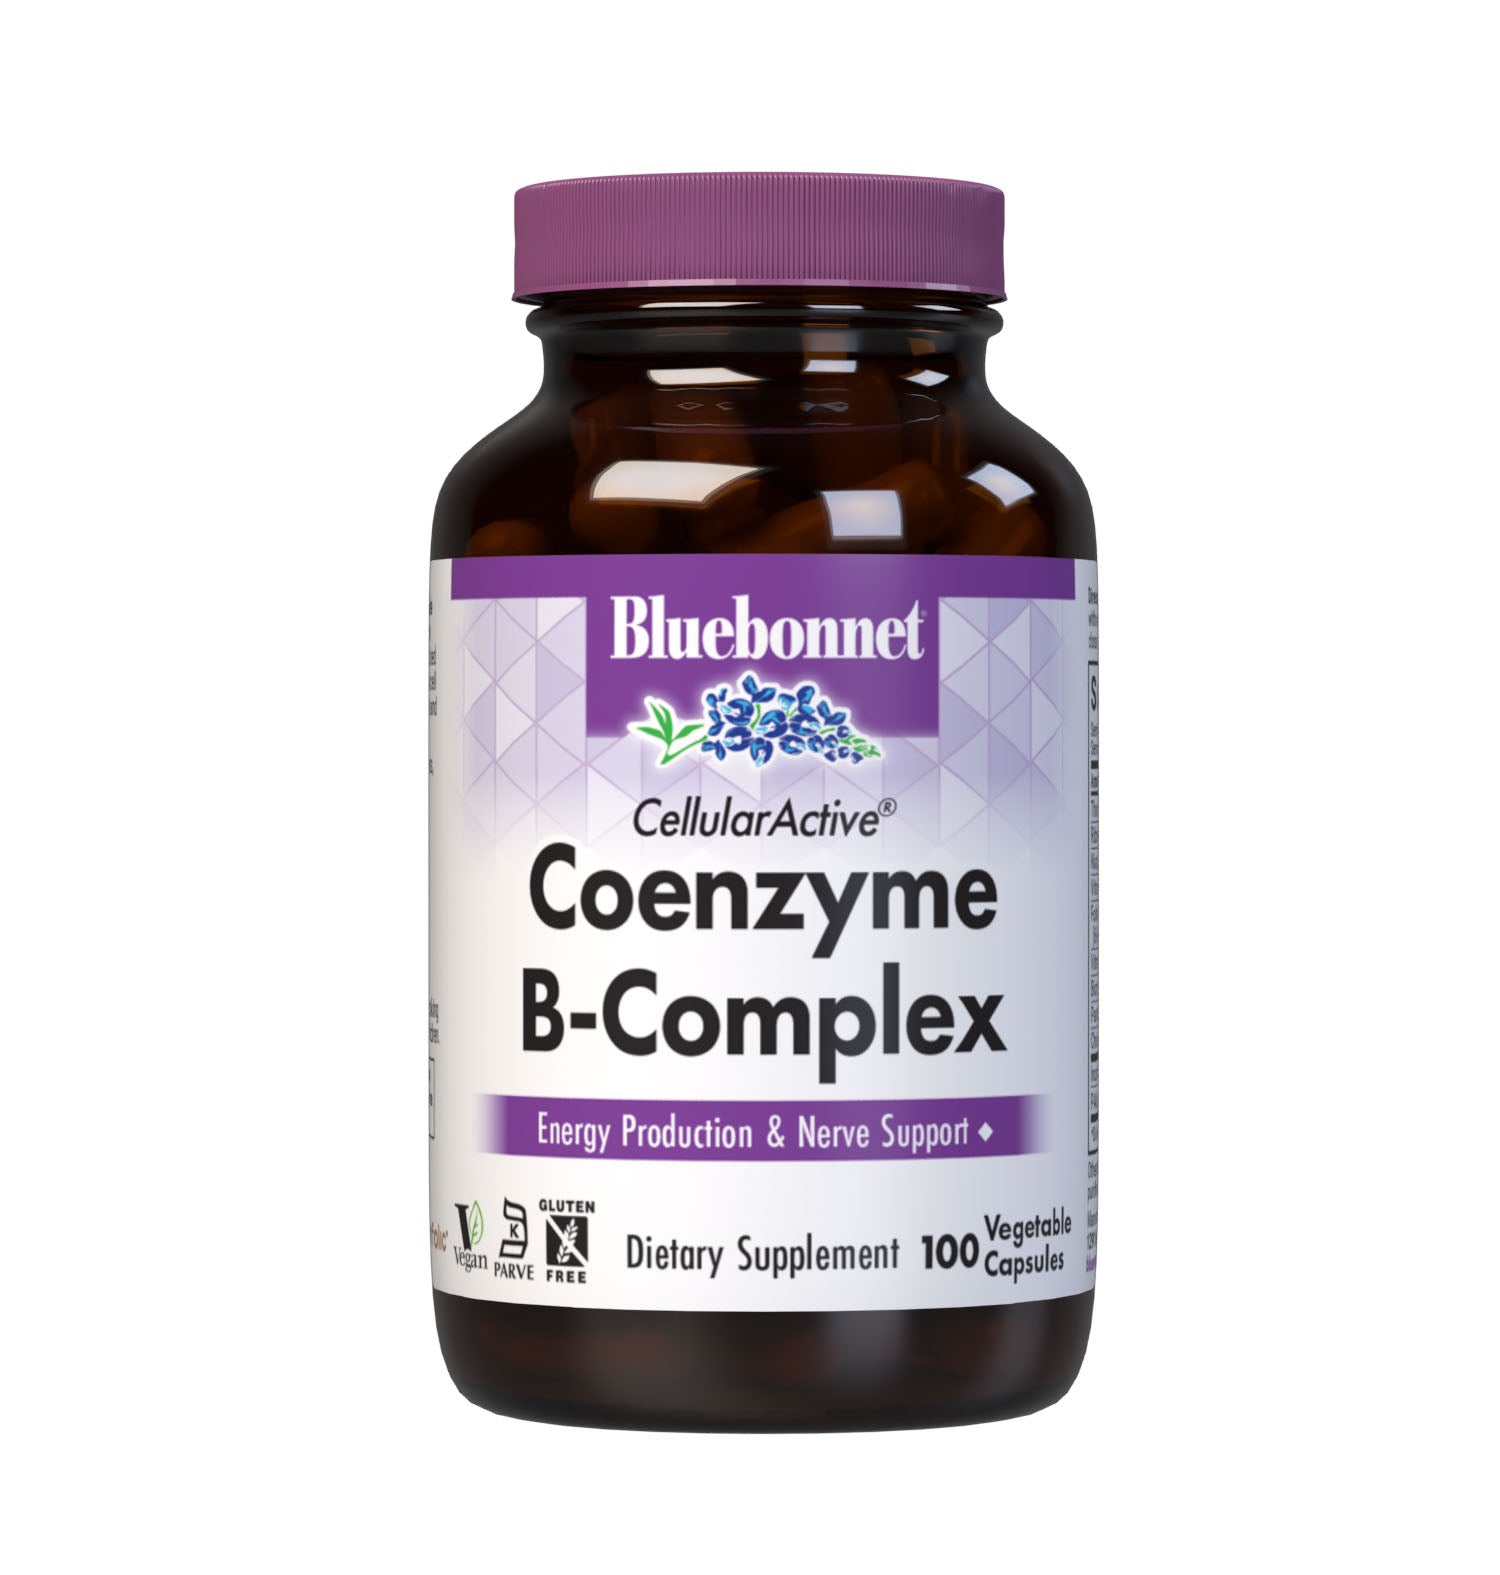 Bluebonnet’s CellularActive Coenzyme B-Complex Vegetable Capsules are formulated with B vitamins and their respective coenzyme forms, which are better absorbed, retained and utilized in the body. B vitamins are essential for energy and red blood cell production, proper nervous system function, healthy hair, skin and nails, and countless other metabolic processes.  #size_100 count